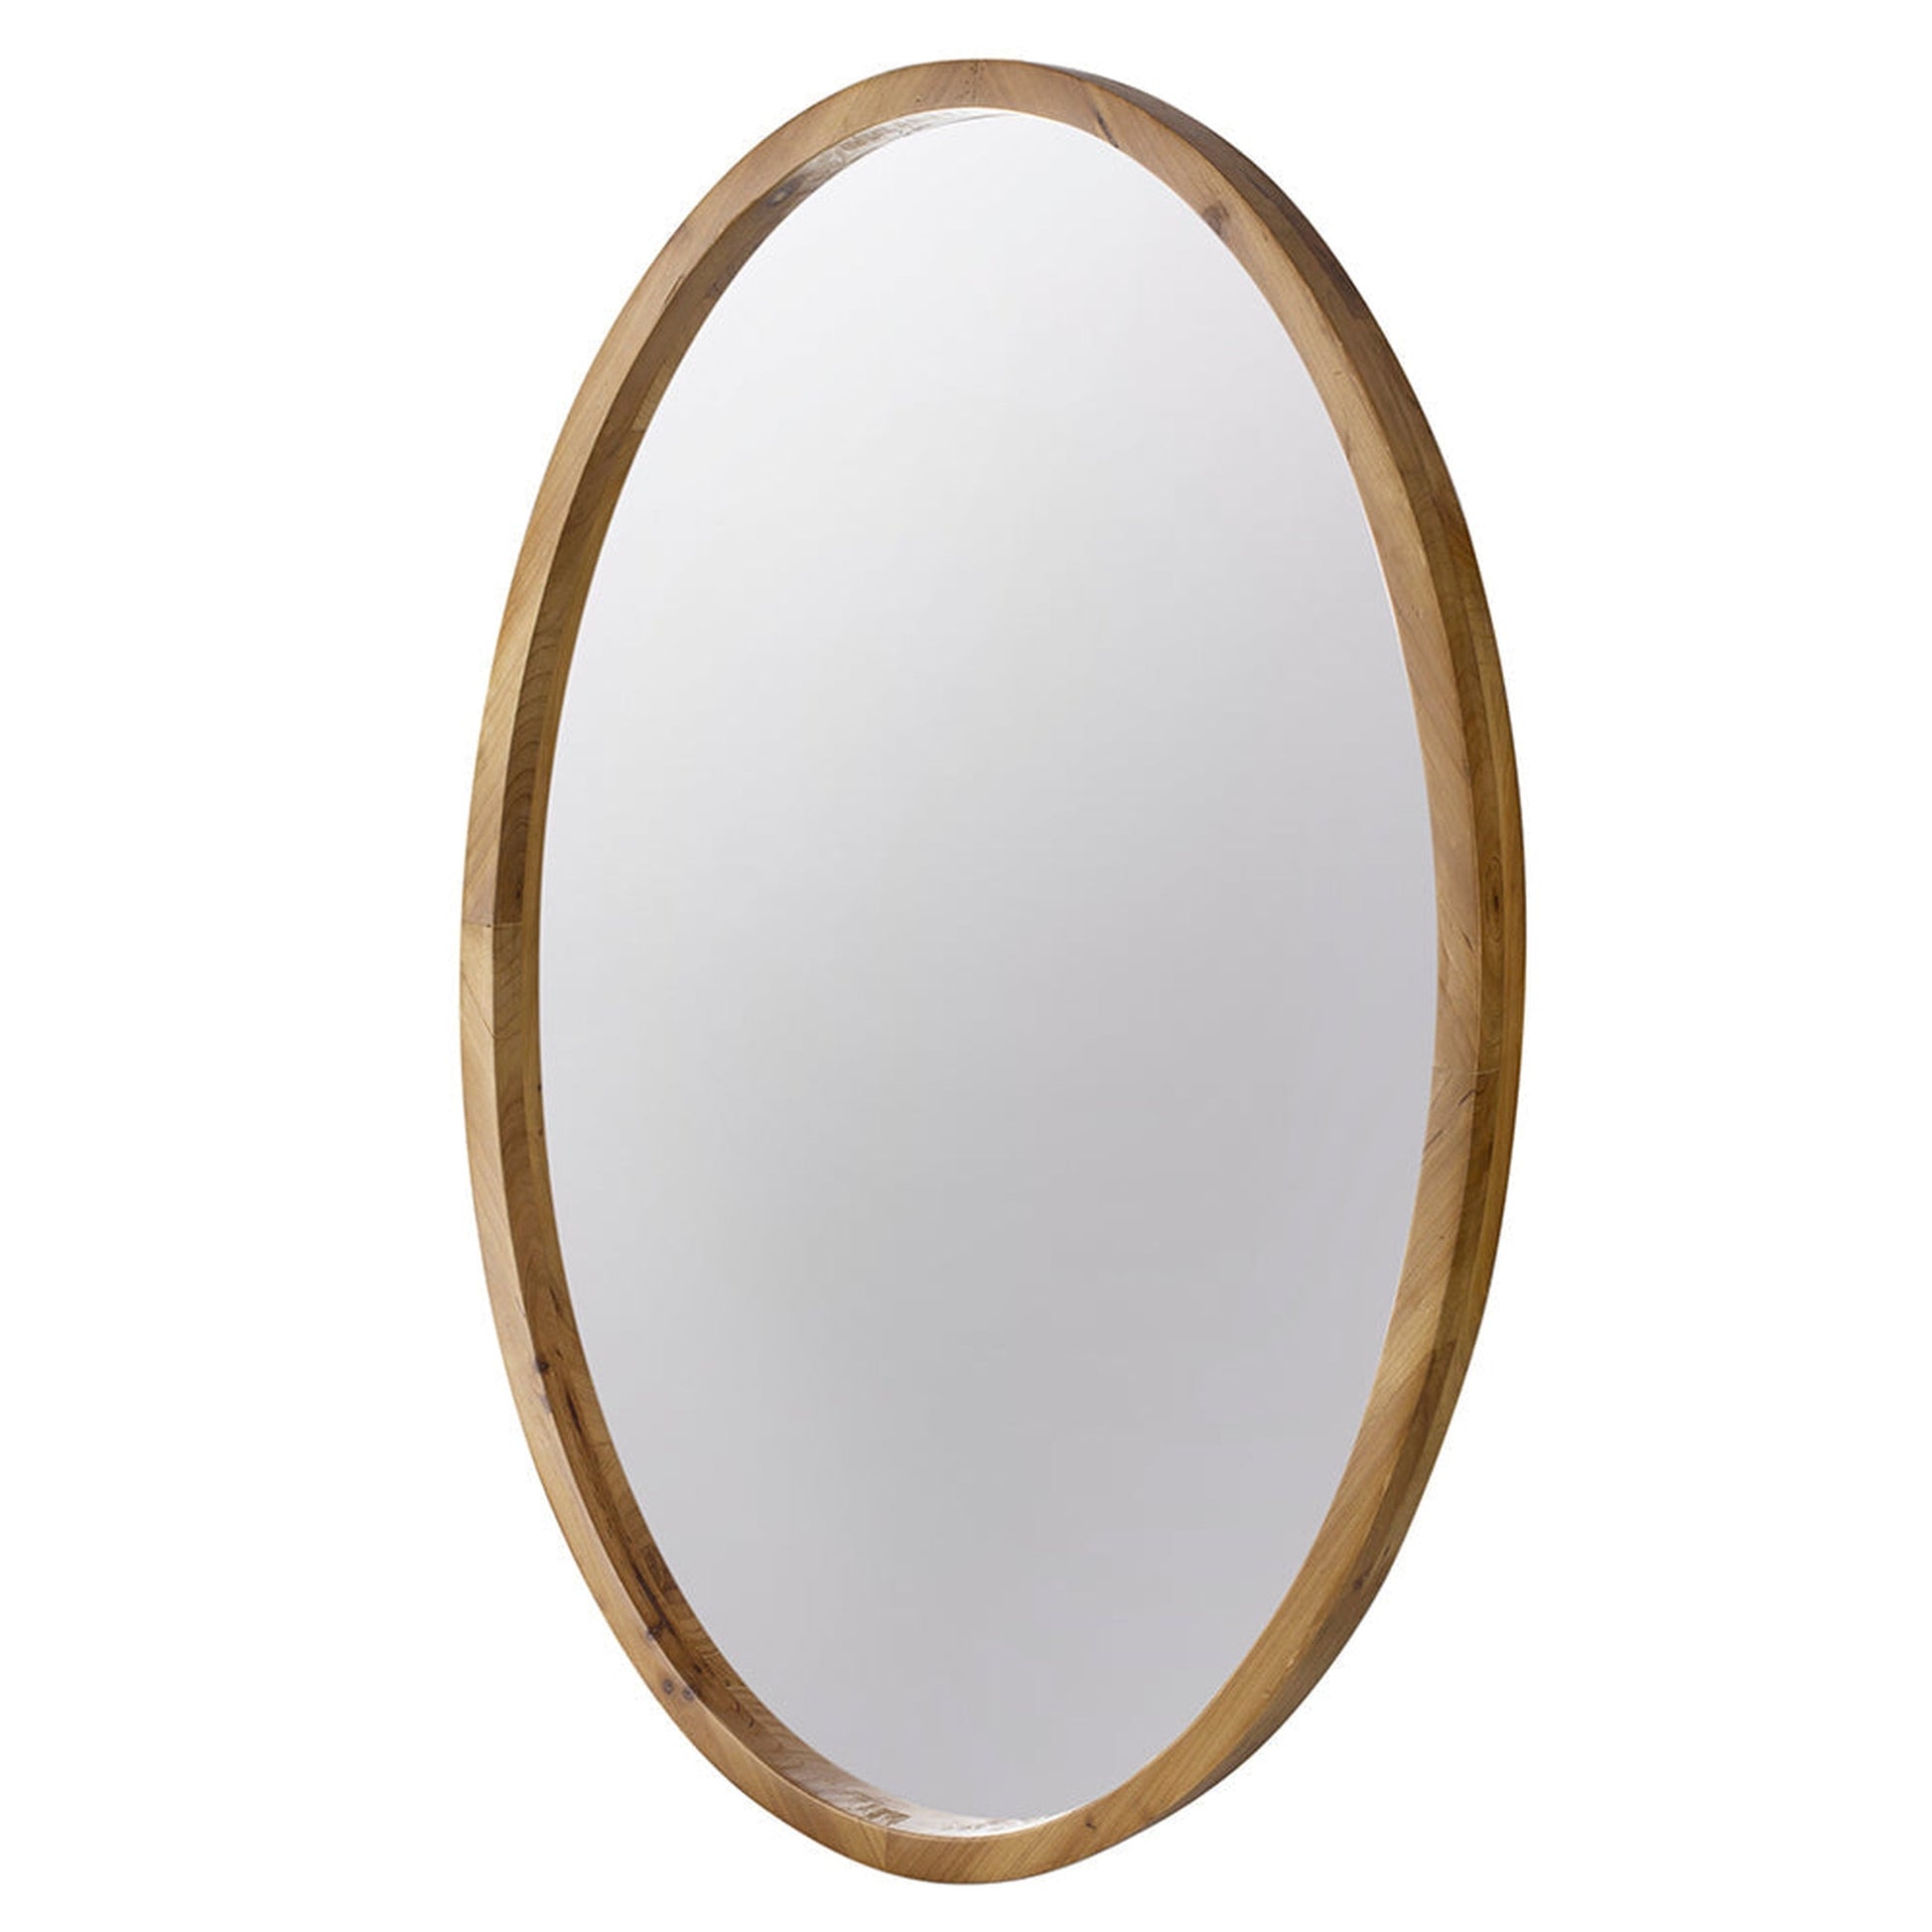 A&B Home Charleston 24" x 35" Bundle of 13 Oval Shaped Warm Brown Wooden Frame Wall-Mounted Mirror